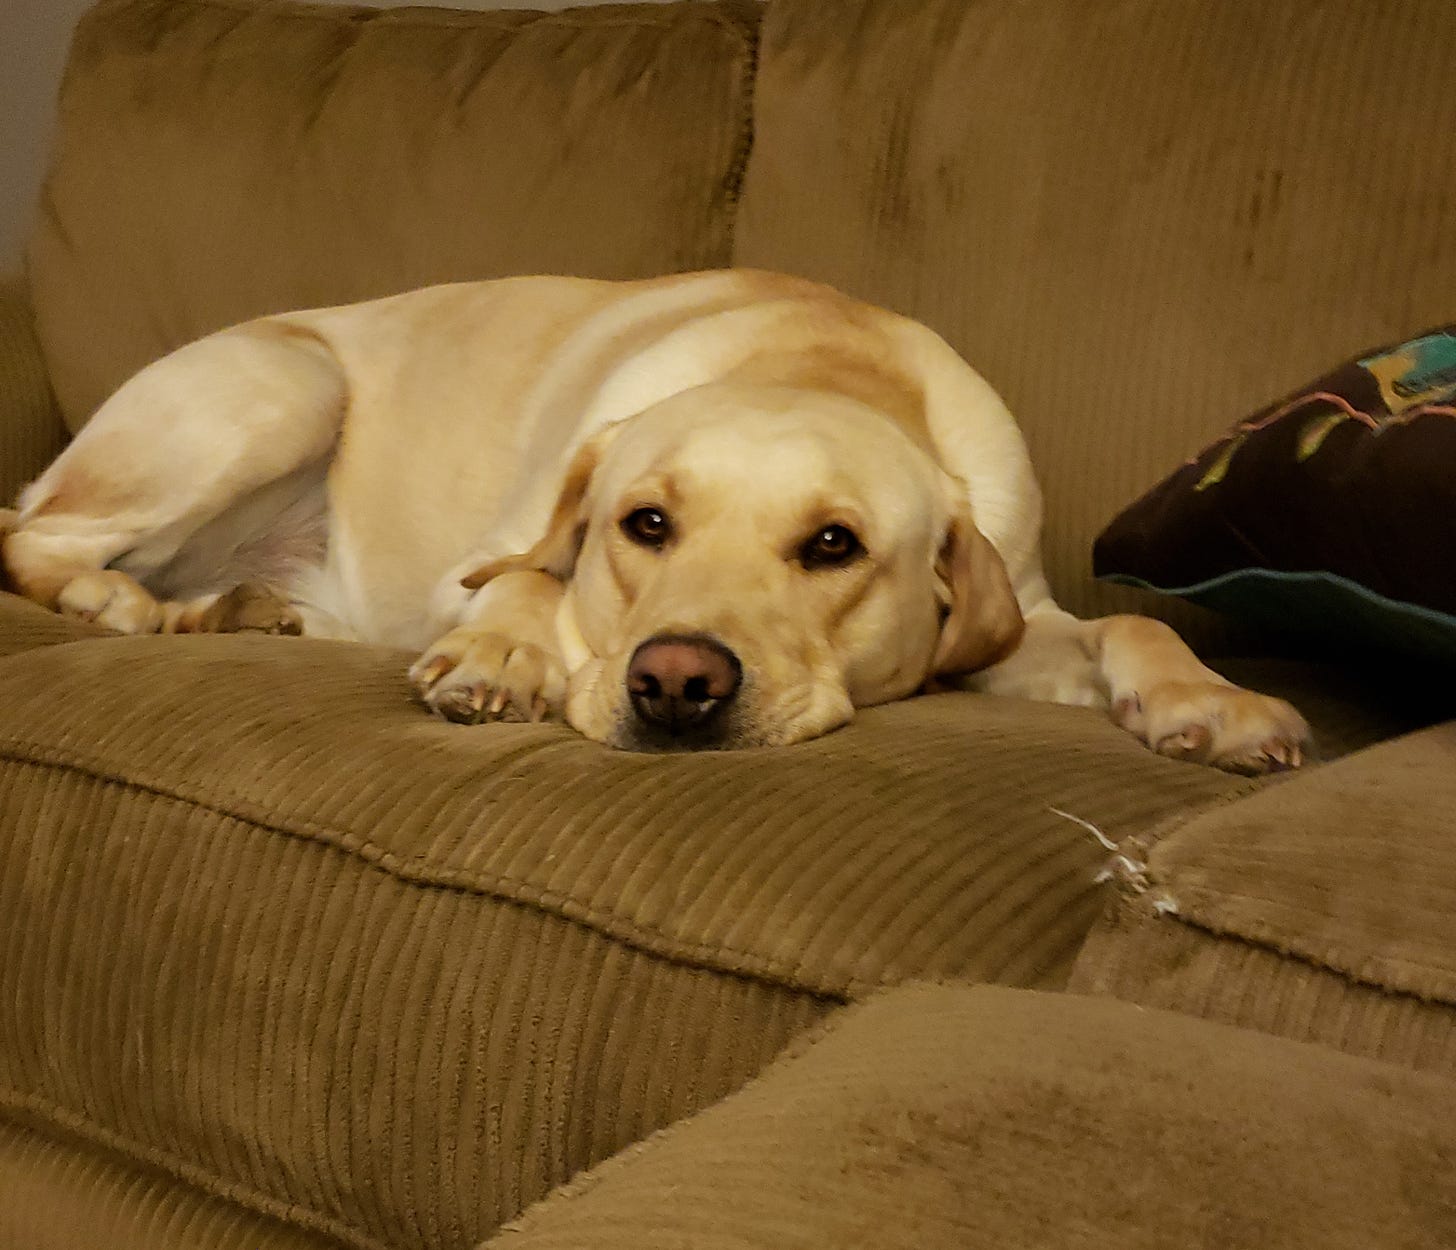 Yellow Lab relaxed on a fraying couch